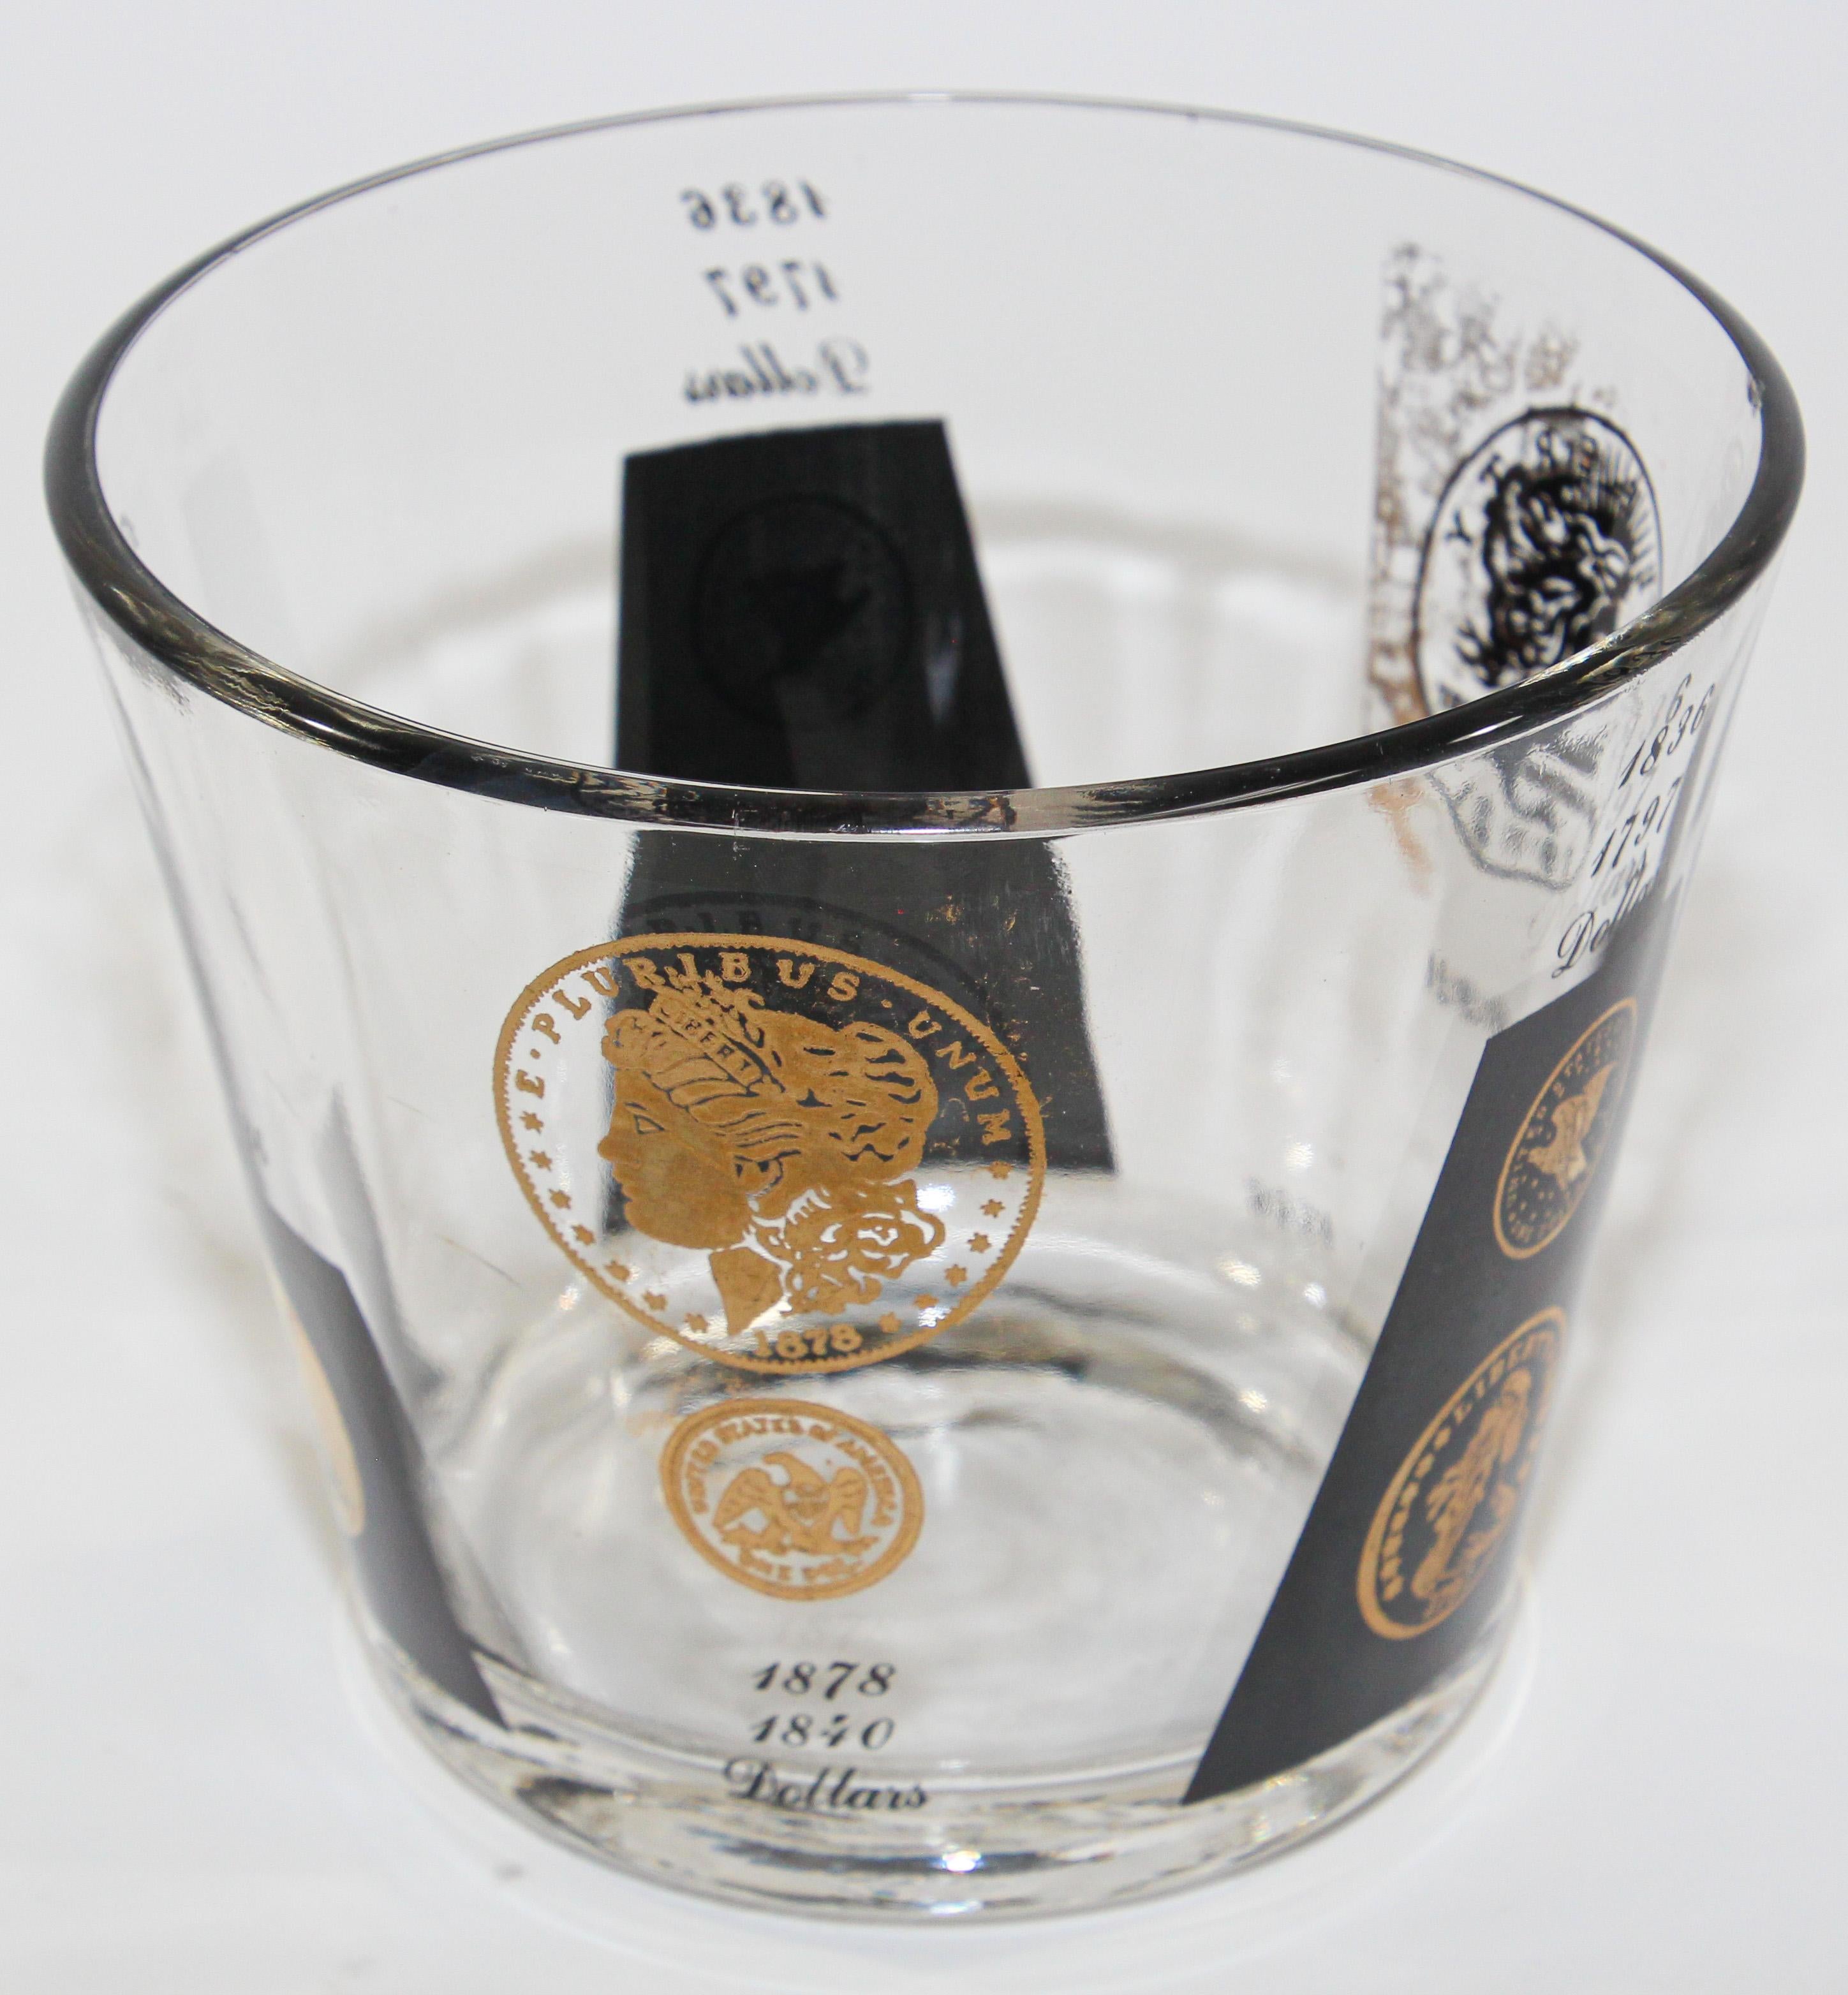 Midcentury vintage Barware Ice Bucket 1960s gold printed presidential coins.
Cera 22-karat gold signed glassware barware. 
Gold and black coin design.
The glasses feature 